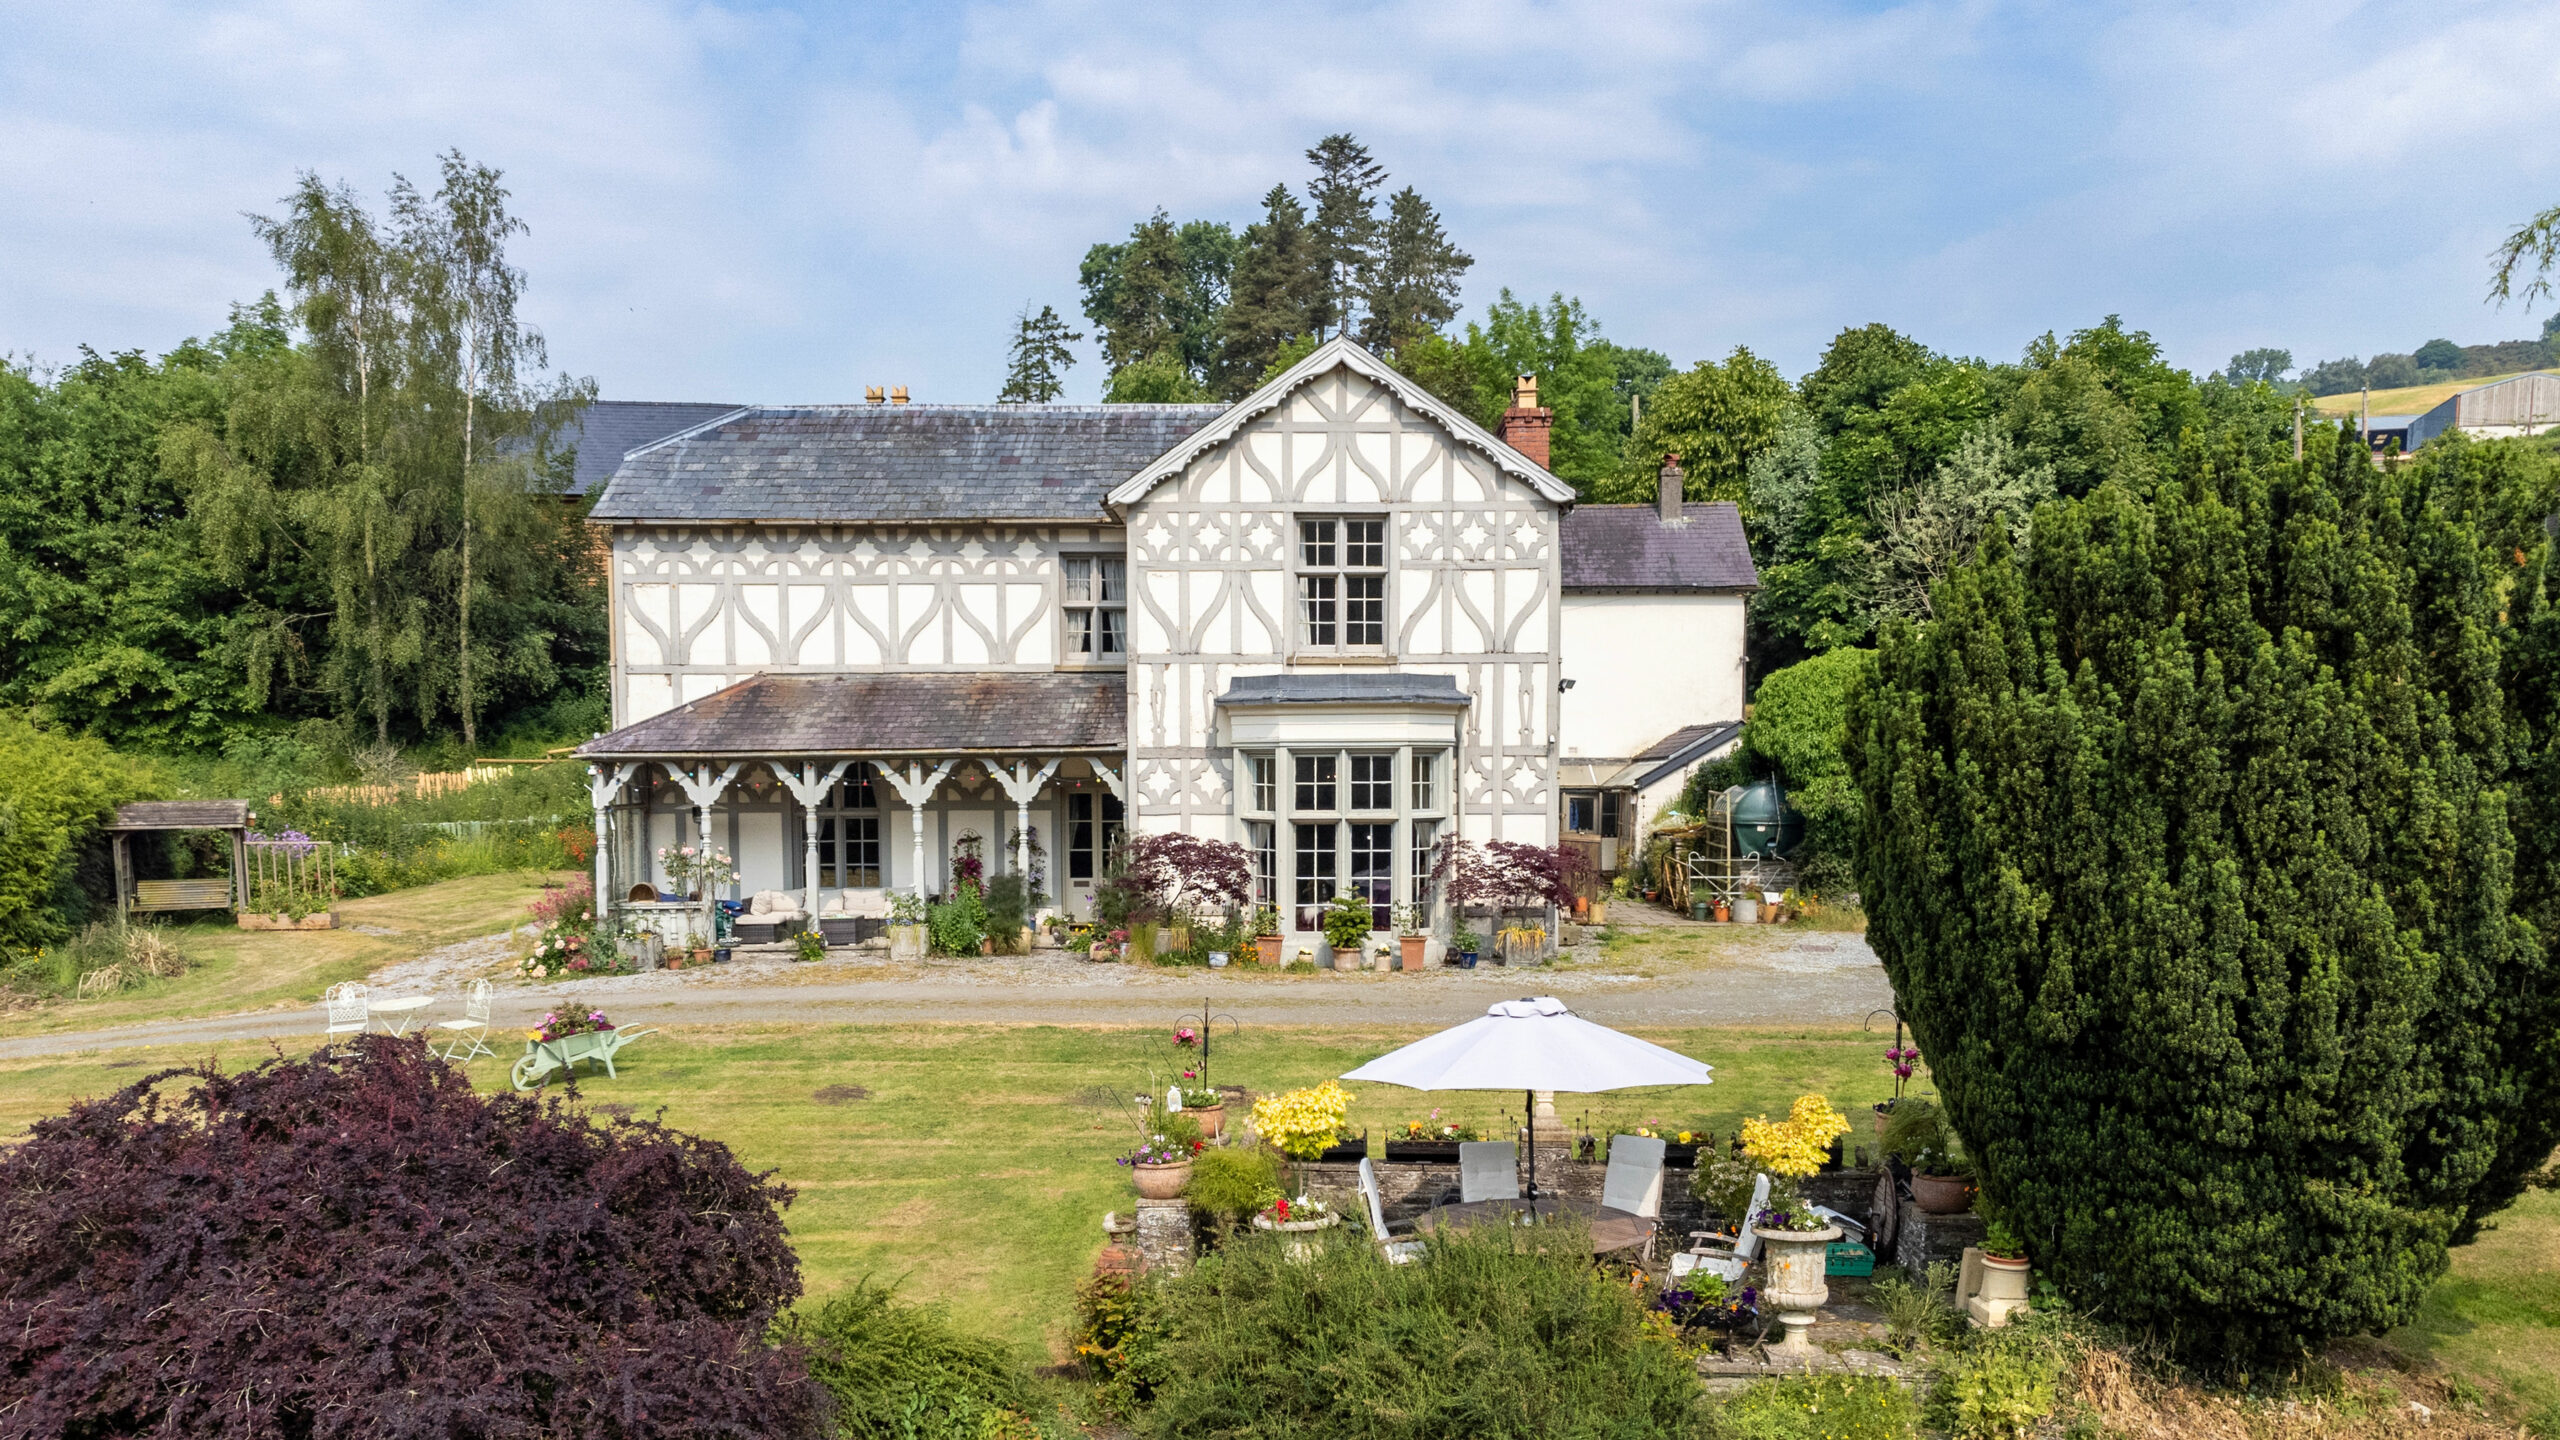 Treburvaugh House – Magnetic appeal, period provenance, unrivalled countryside